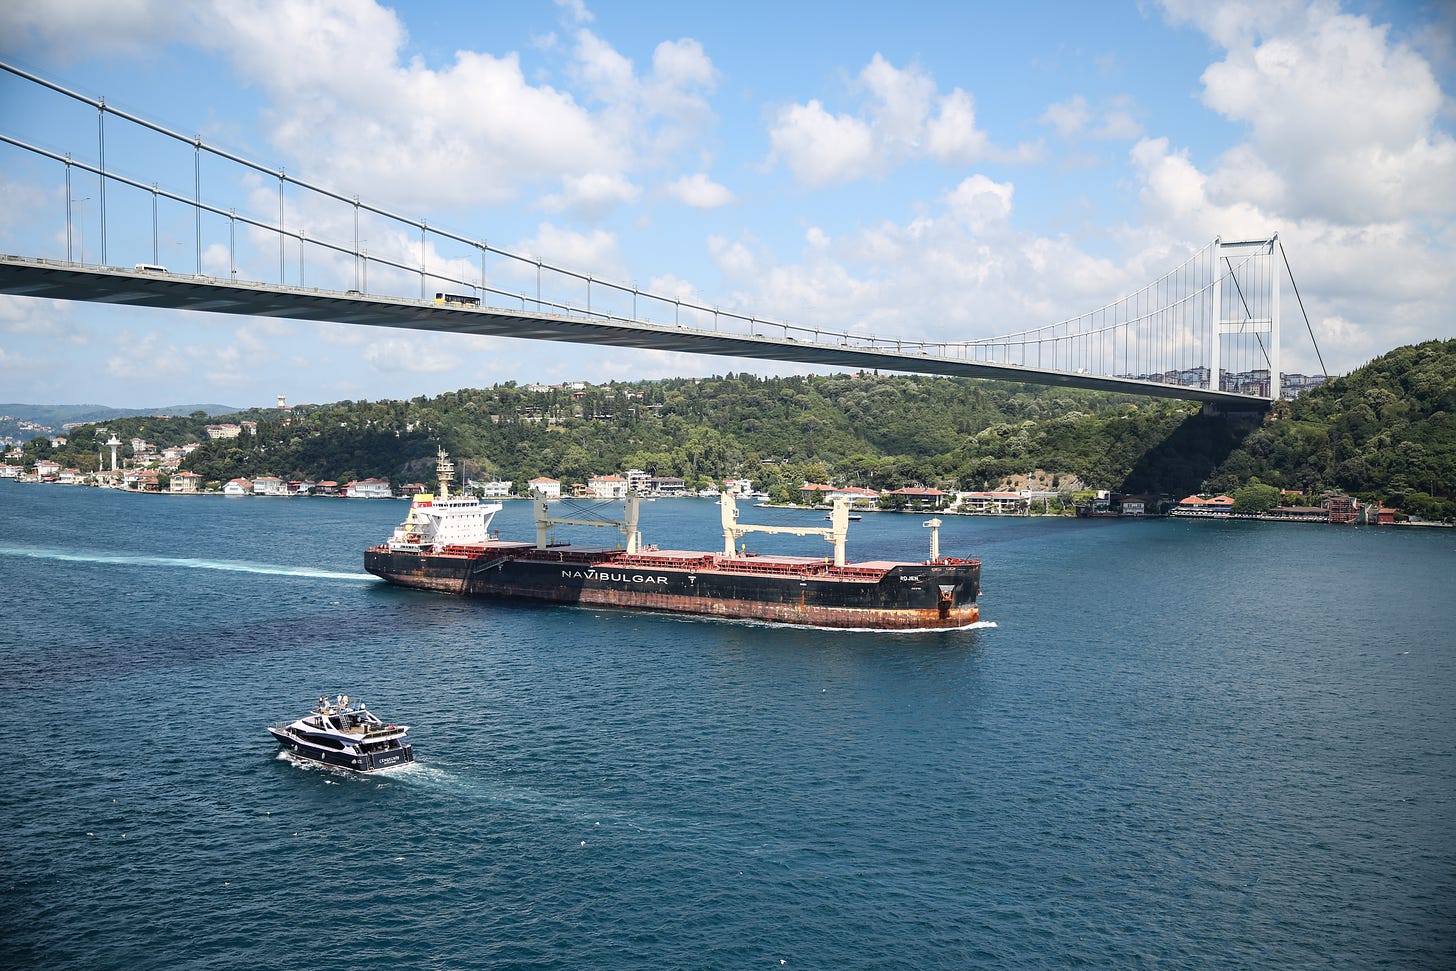 Maltese-flagged ship Rojen, which departed from Ukraine's Chornomorsk port carrying 13,000 tons of corn from Ukraine to United Kingdom, passes through the Bosphorus on August 7, 2022 in İstanbul, Türkiye. (Photo by Cem Tekkesinoglu/ dia images)